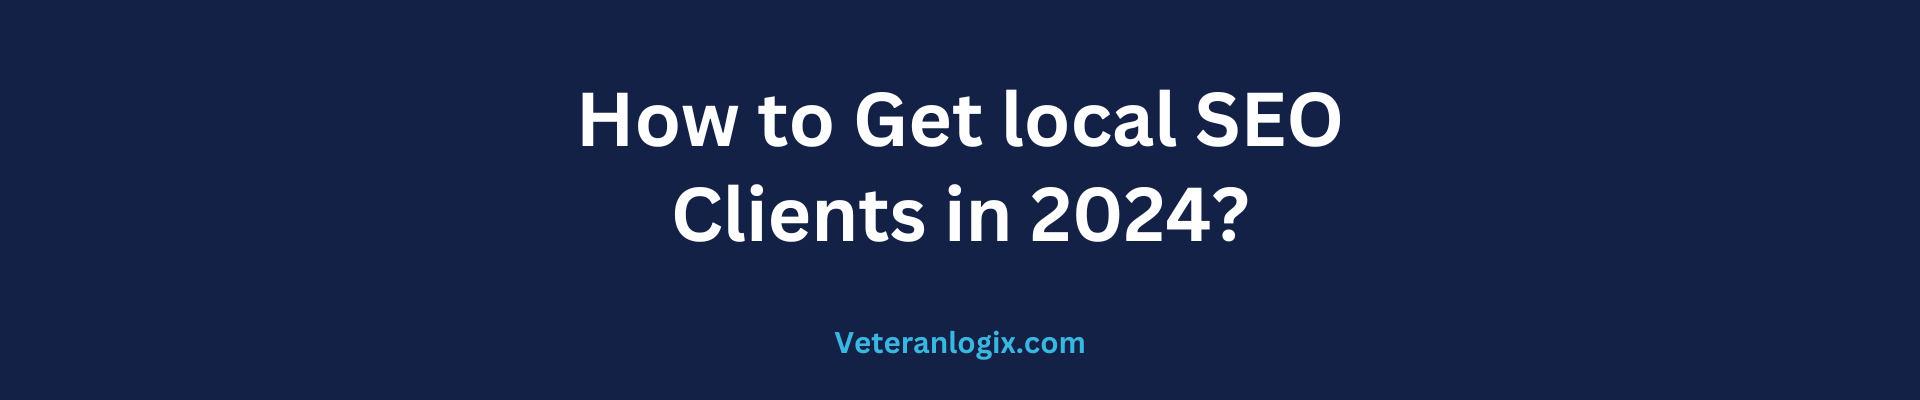 how to get local seo clients in 2024